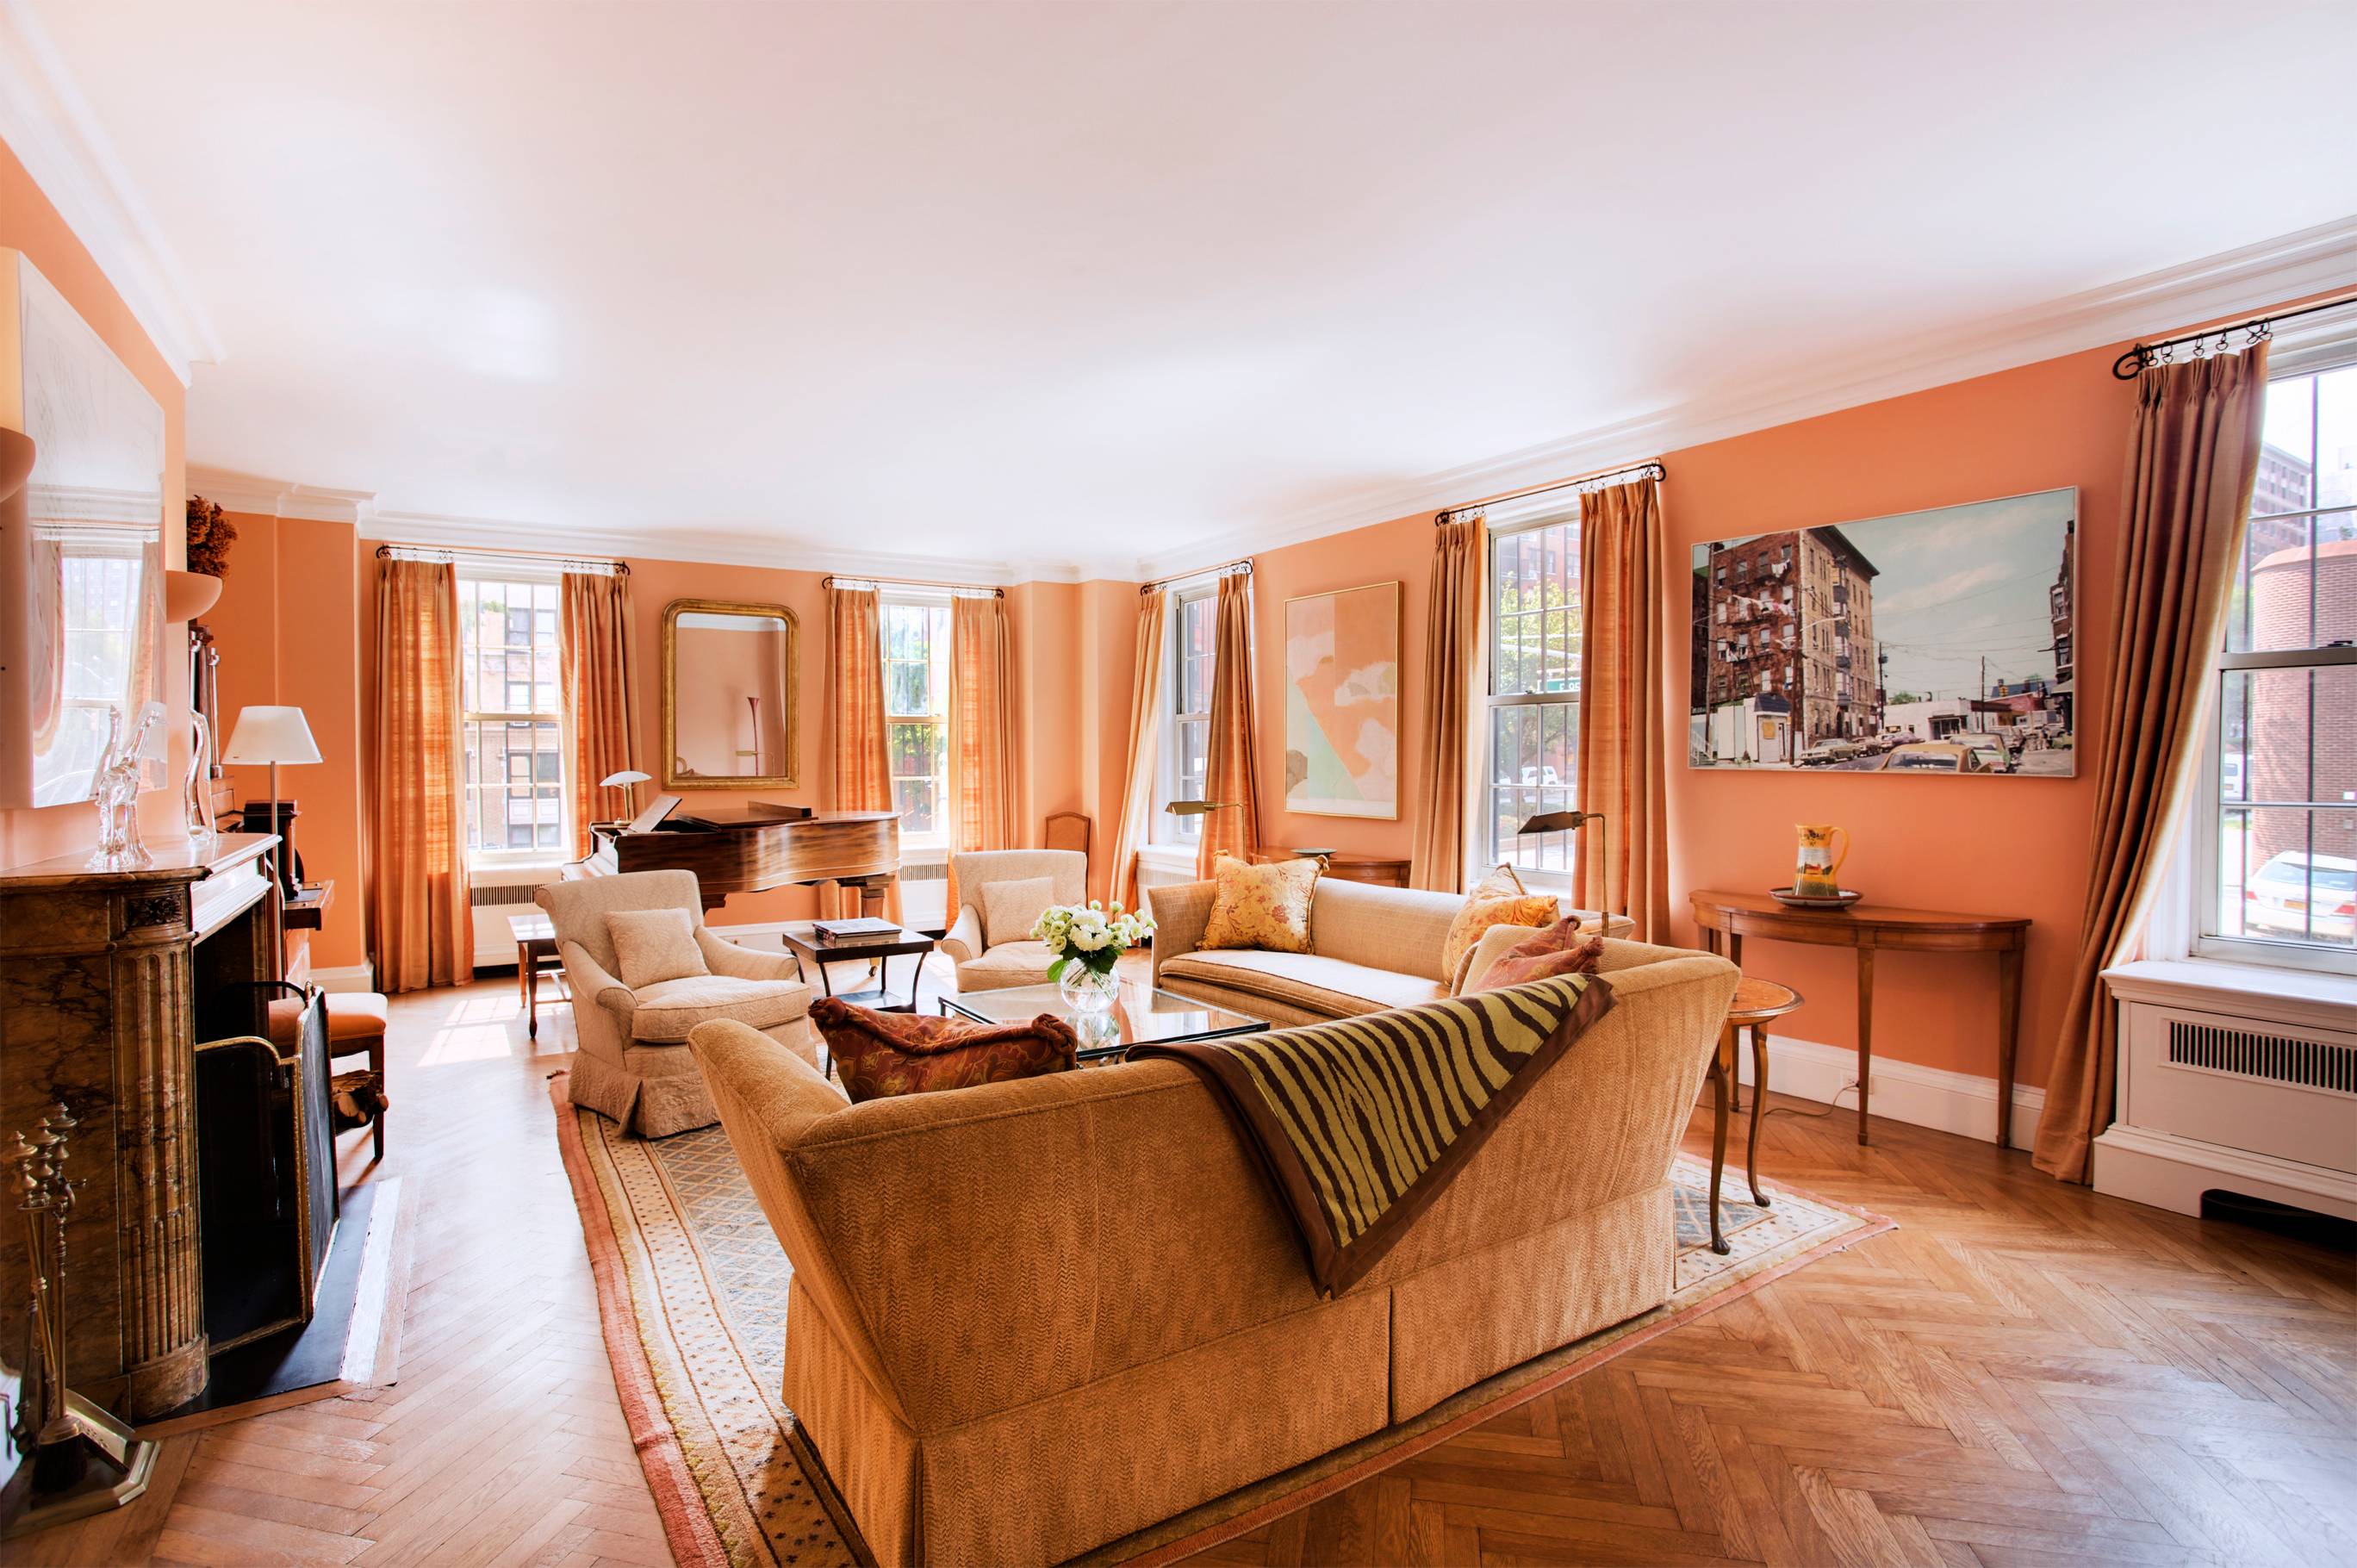 Experience the grandeur of this beautiful maisonette at one of the most prestigious addresses on the Upper East Side.